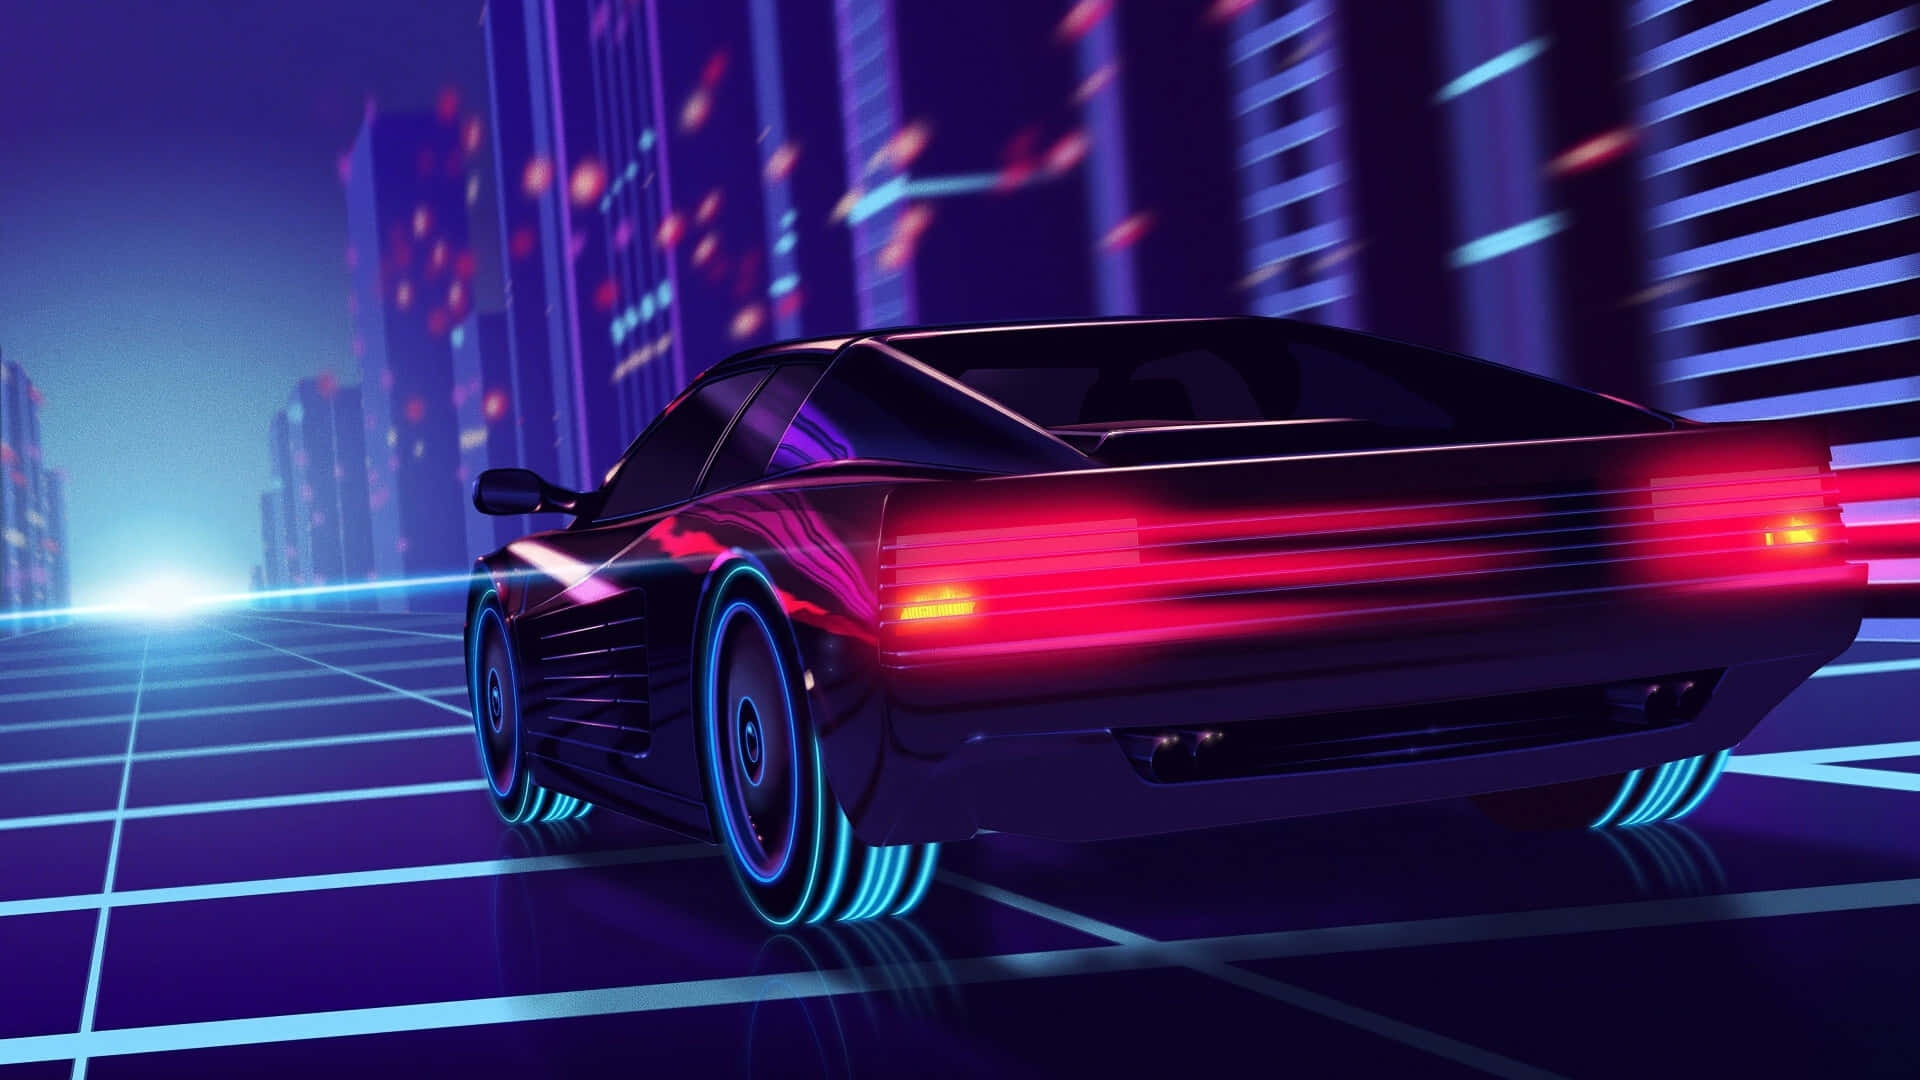 Neon Speed Synthwave Car Wallpaper